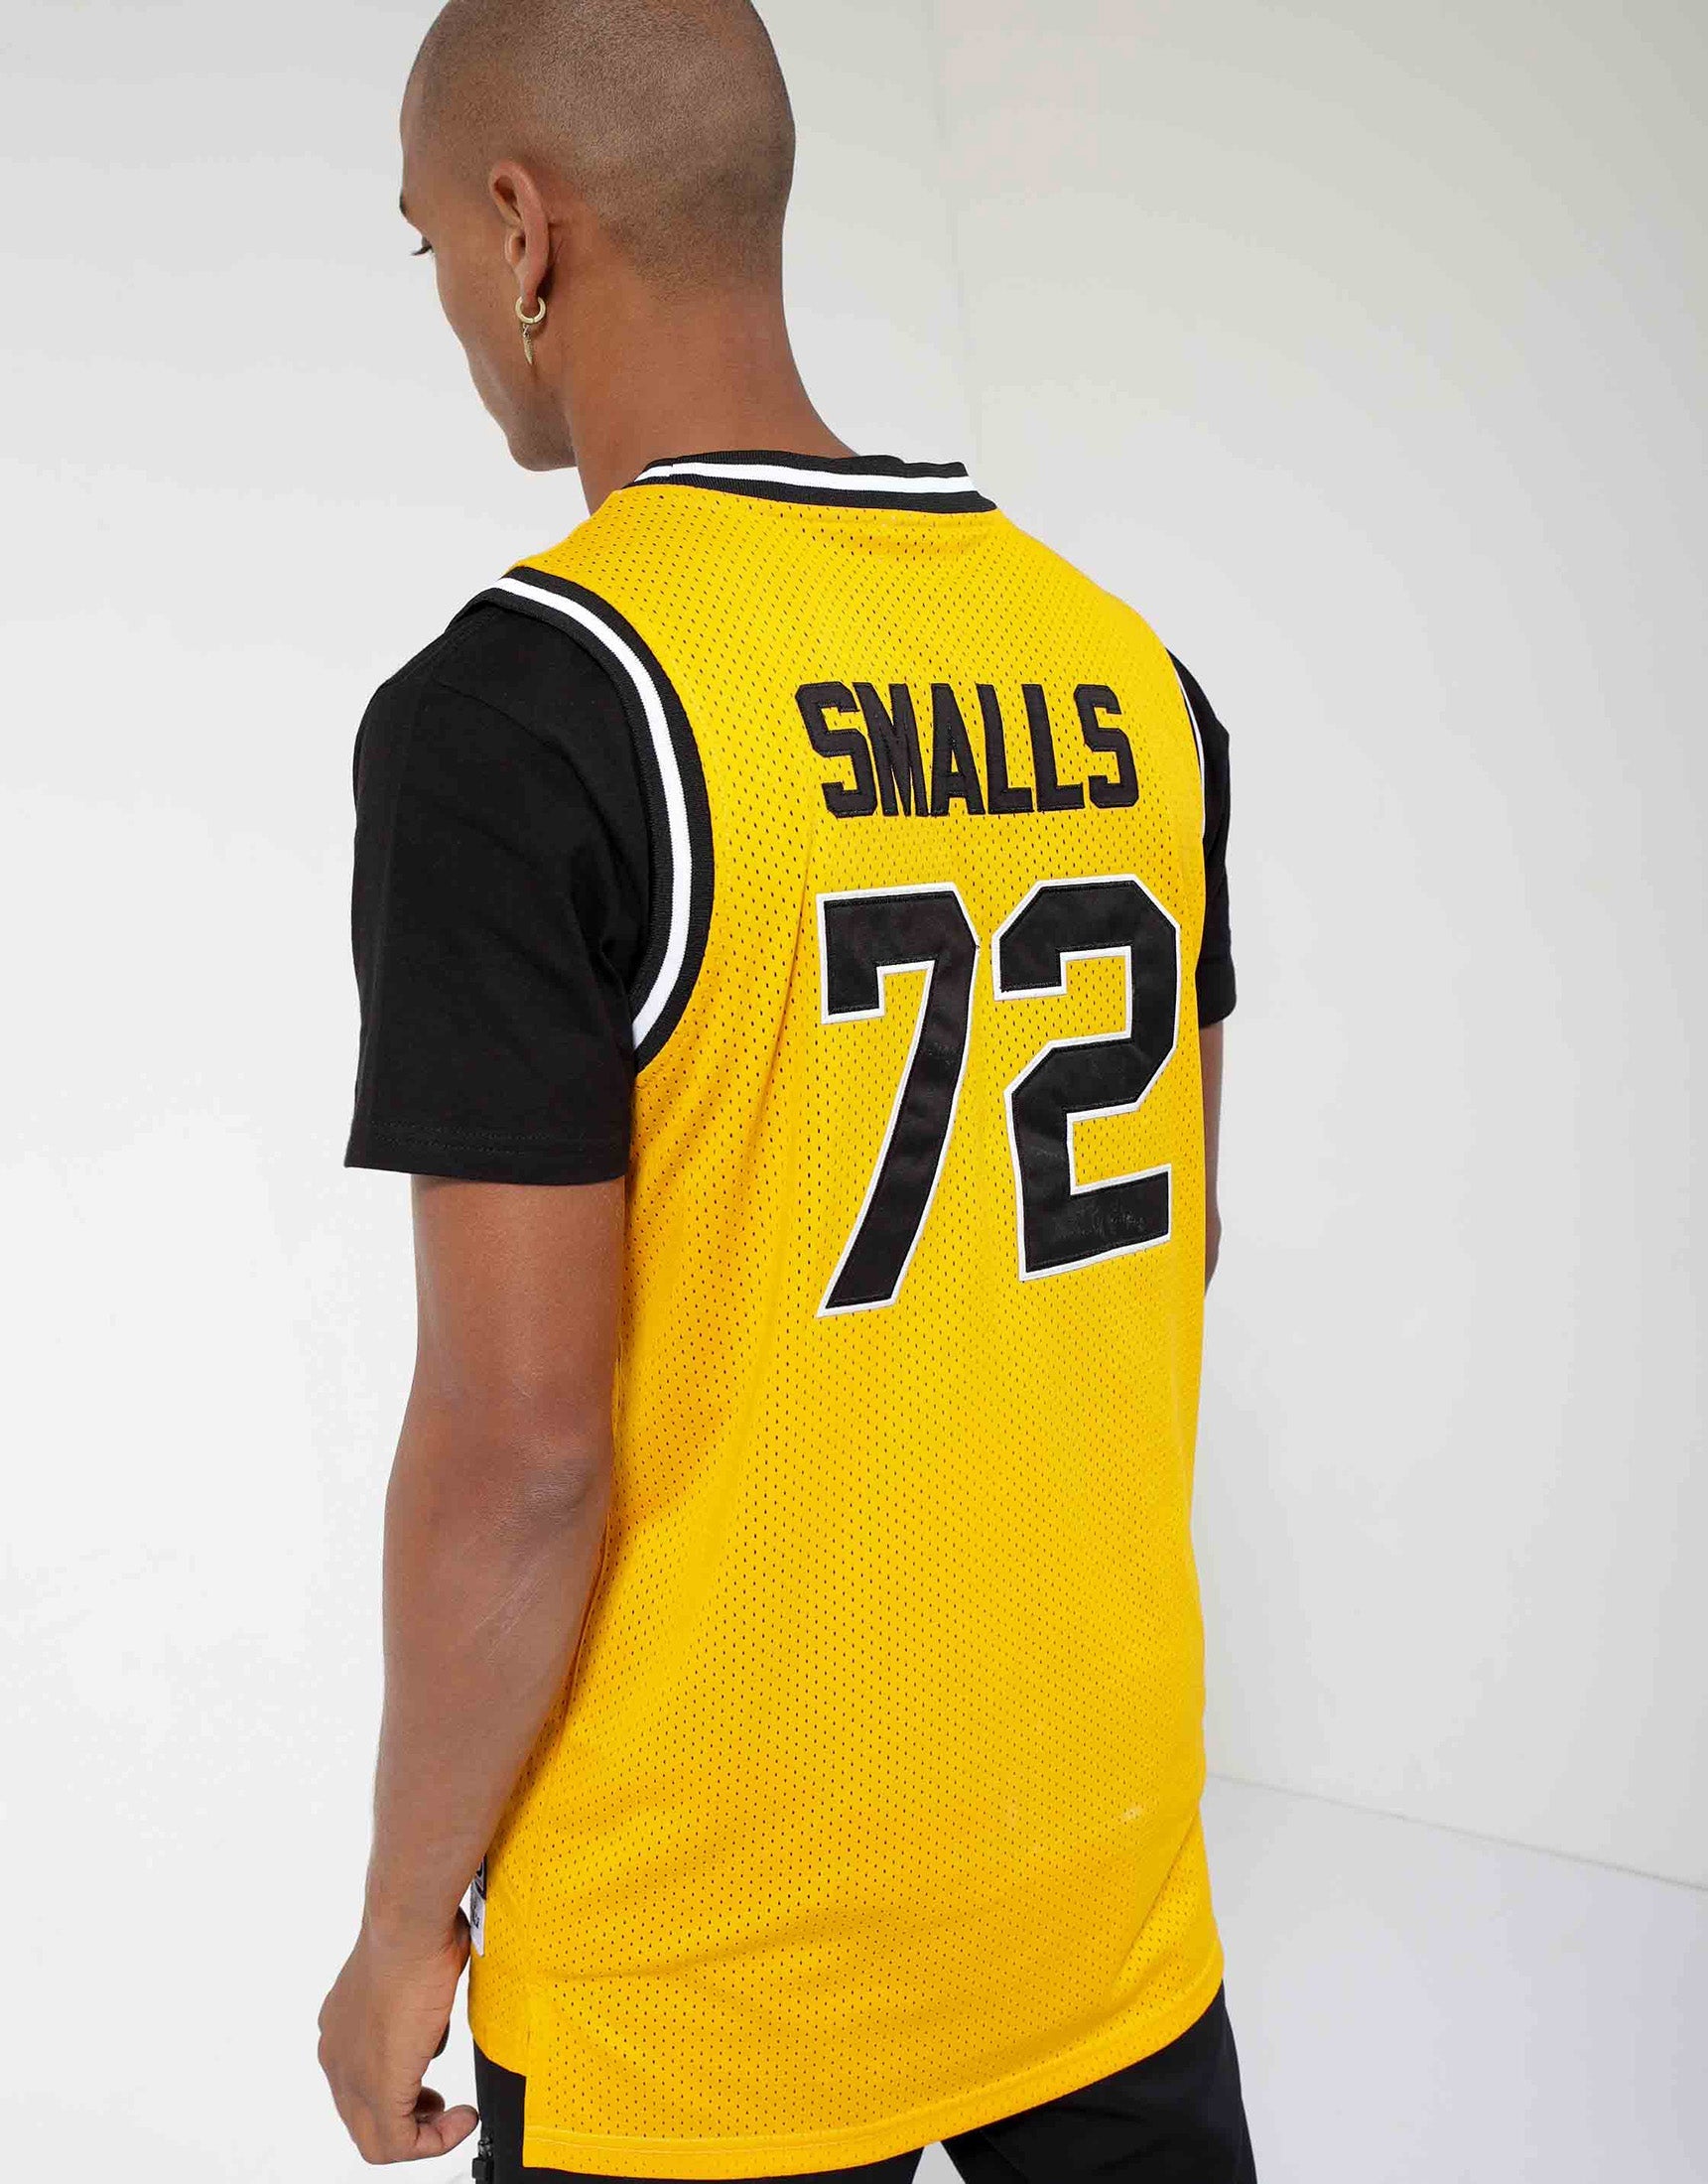  AIFFEE 'BadBoy' #72 Smalls Basketball Jersey S-XXXL Yellow, 90S  Hip Hop Clothing for Party, Stitched Letters and Numbers : Clothing, Shoes